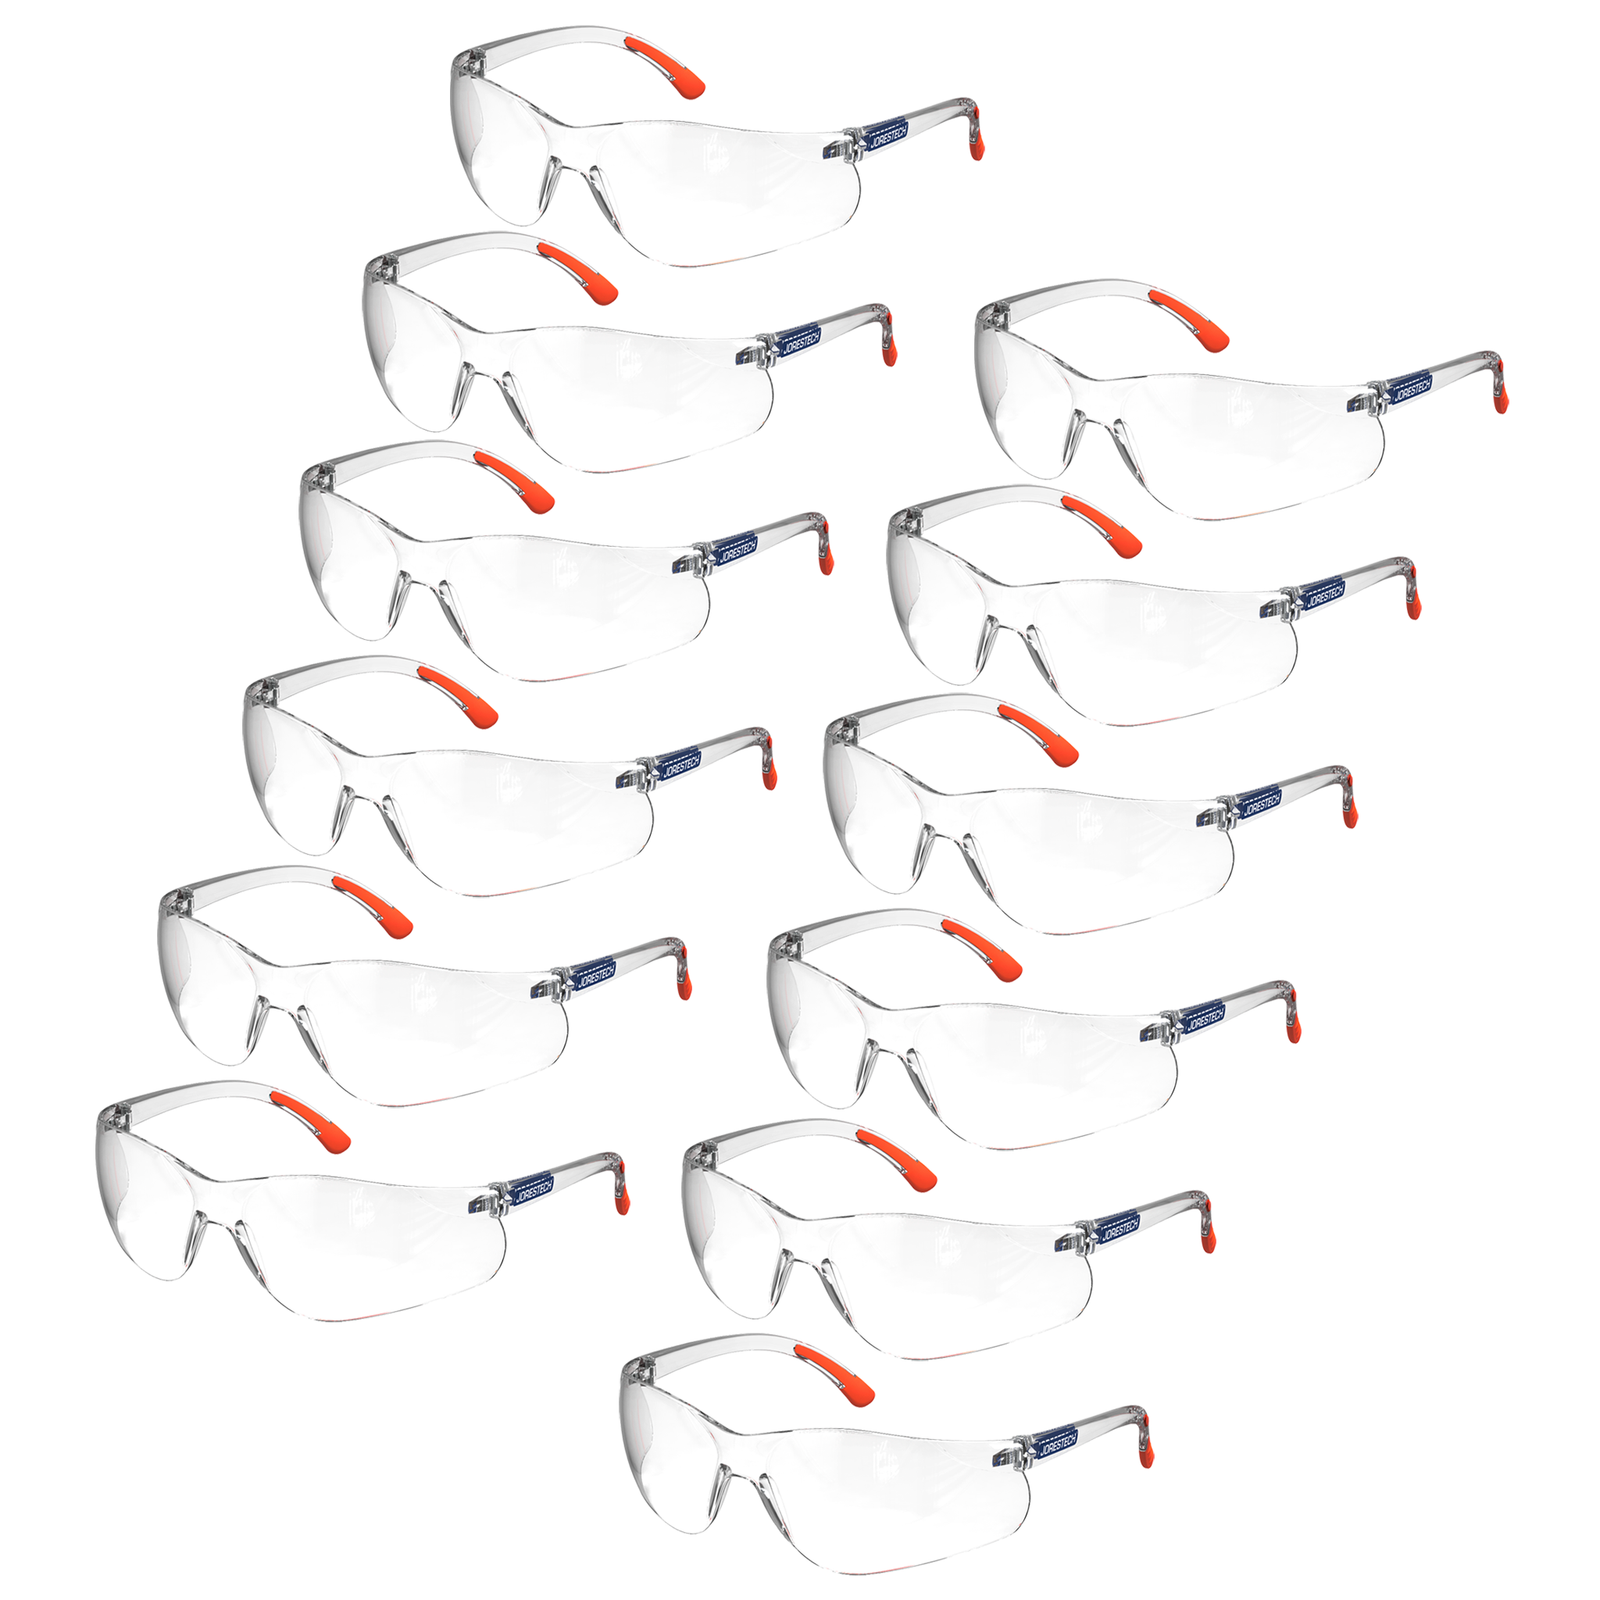 Wraparound JORESTECH safety glasses for high impact protection in a pack of 12